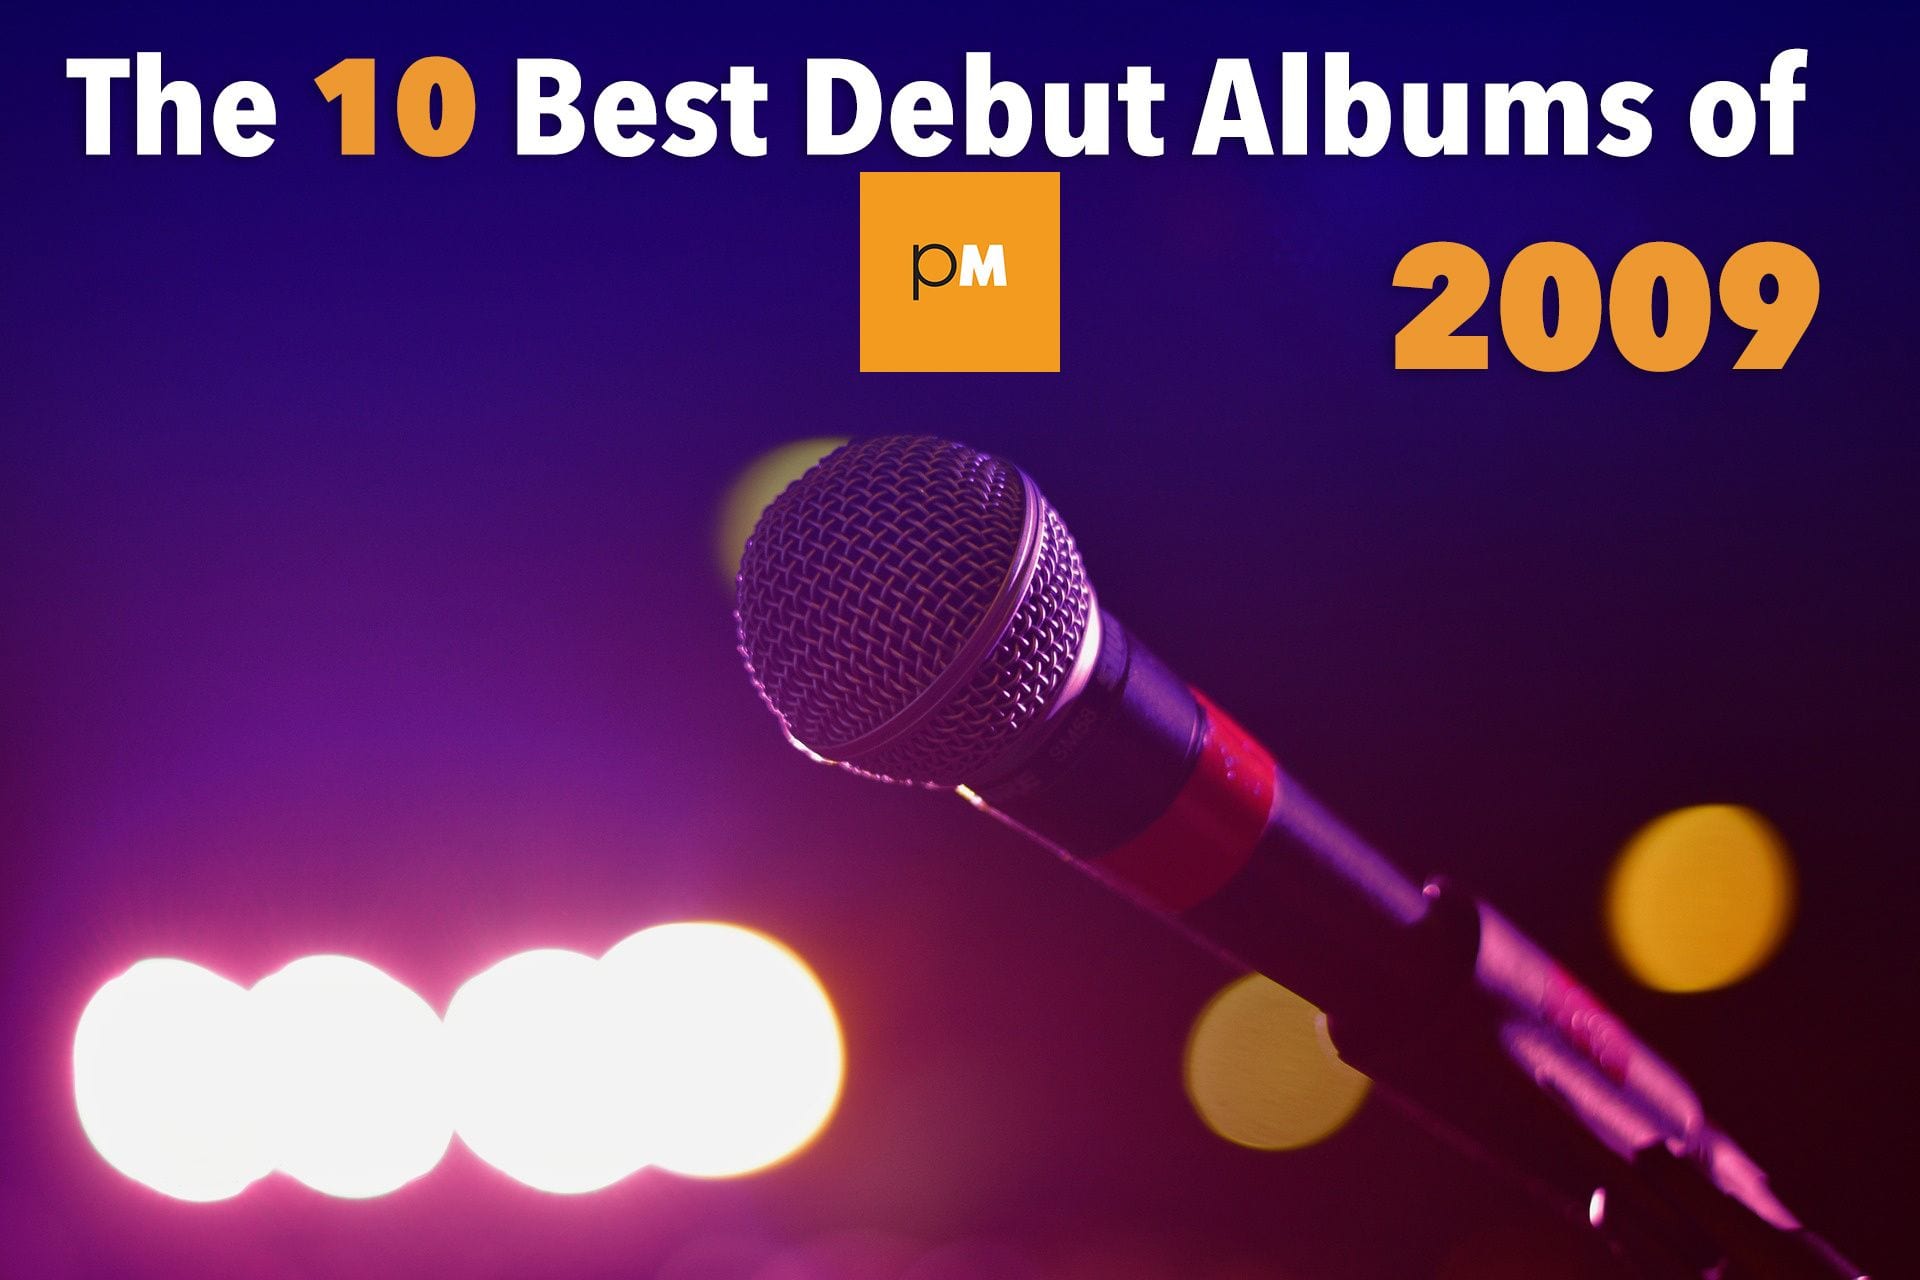 The 10 Best Debut Albums of 2009